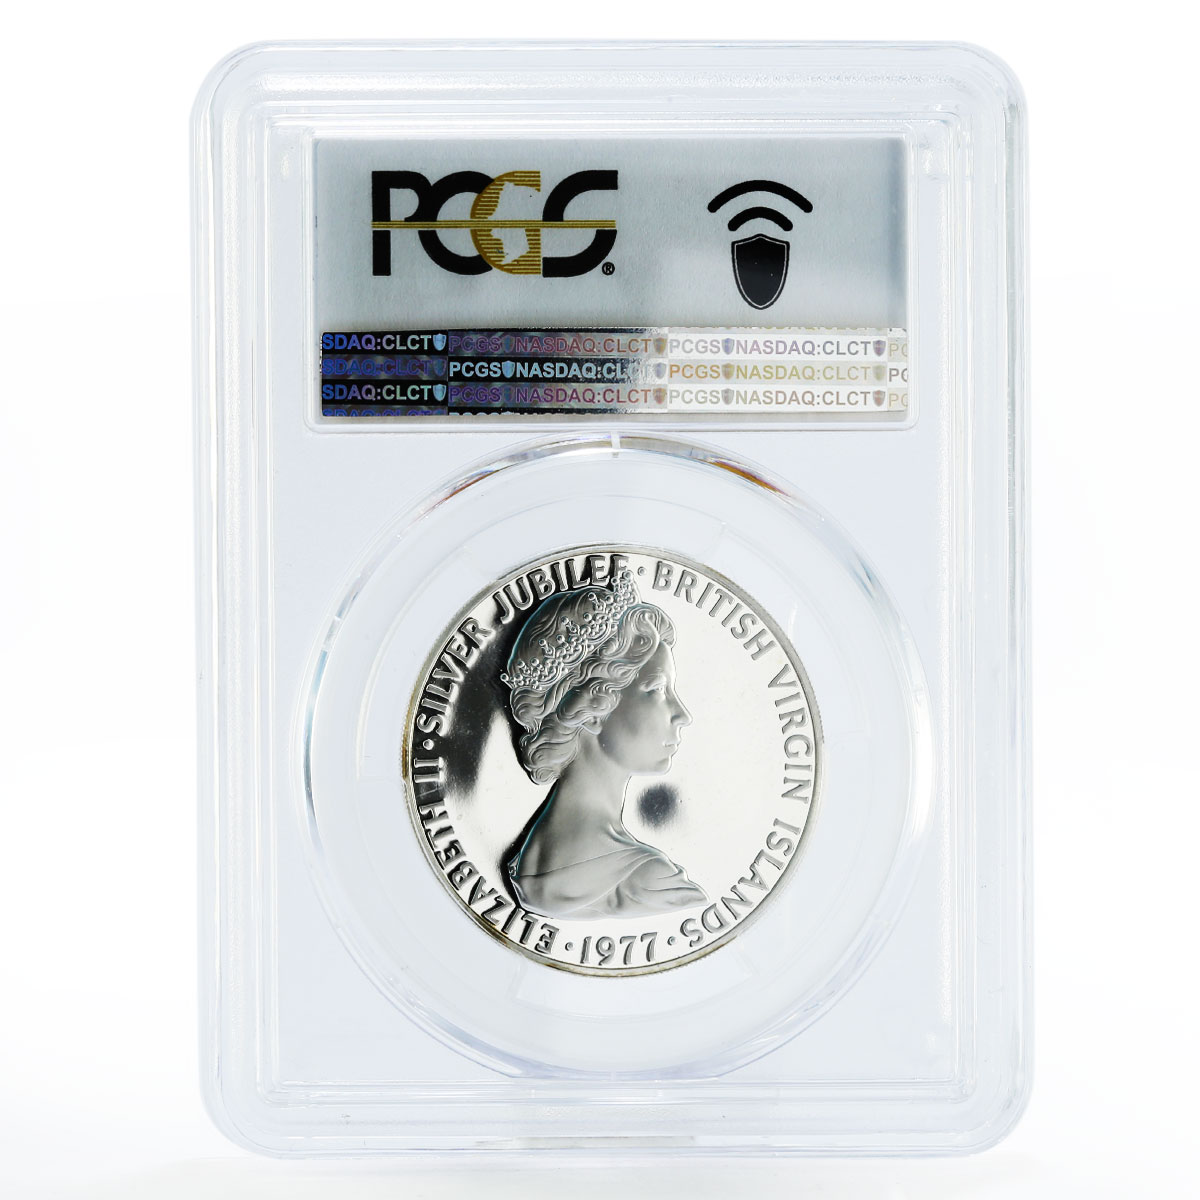 British Virgin Islands 50 cents Two Pelicans PR68 PCGS proof silver coin 1977